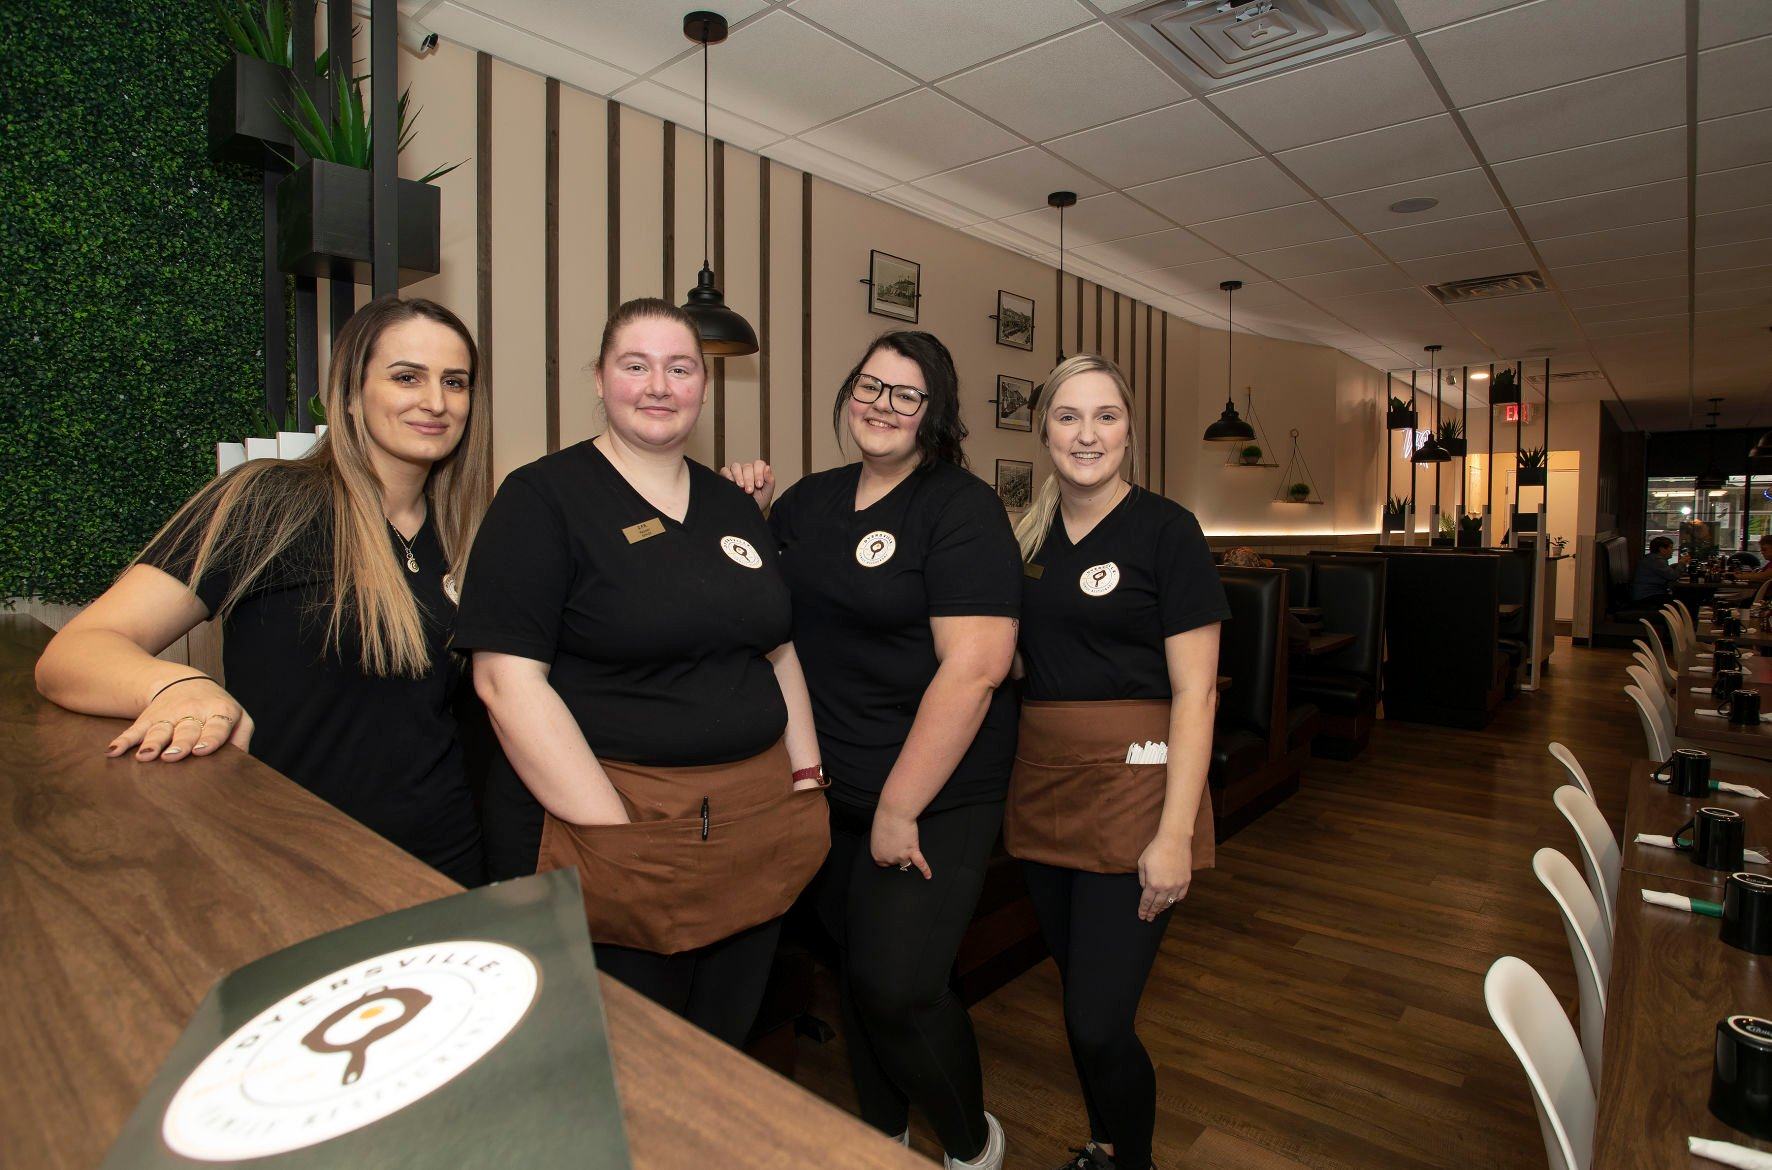 Dyersville Family Restaurant owner Abby Sejdini (from left) and servers Kayleen Ellerbach, Brittany Jasper and Rylee Davis in the newly renovated business in Dyersville, Iowa, on Wednesday, March 23, 2022.    PHOTO CREDIT: Stephen Gassman